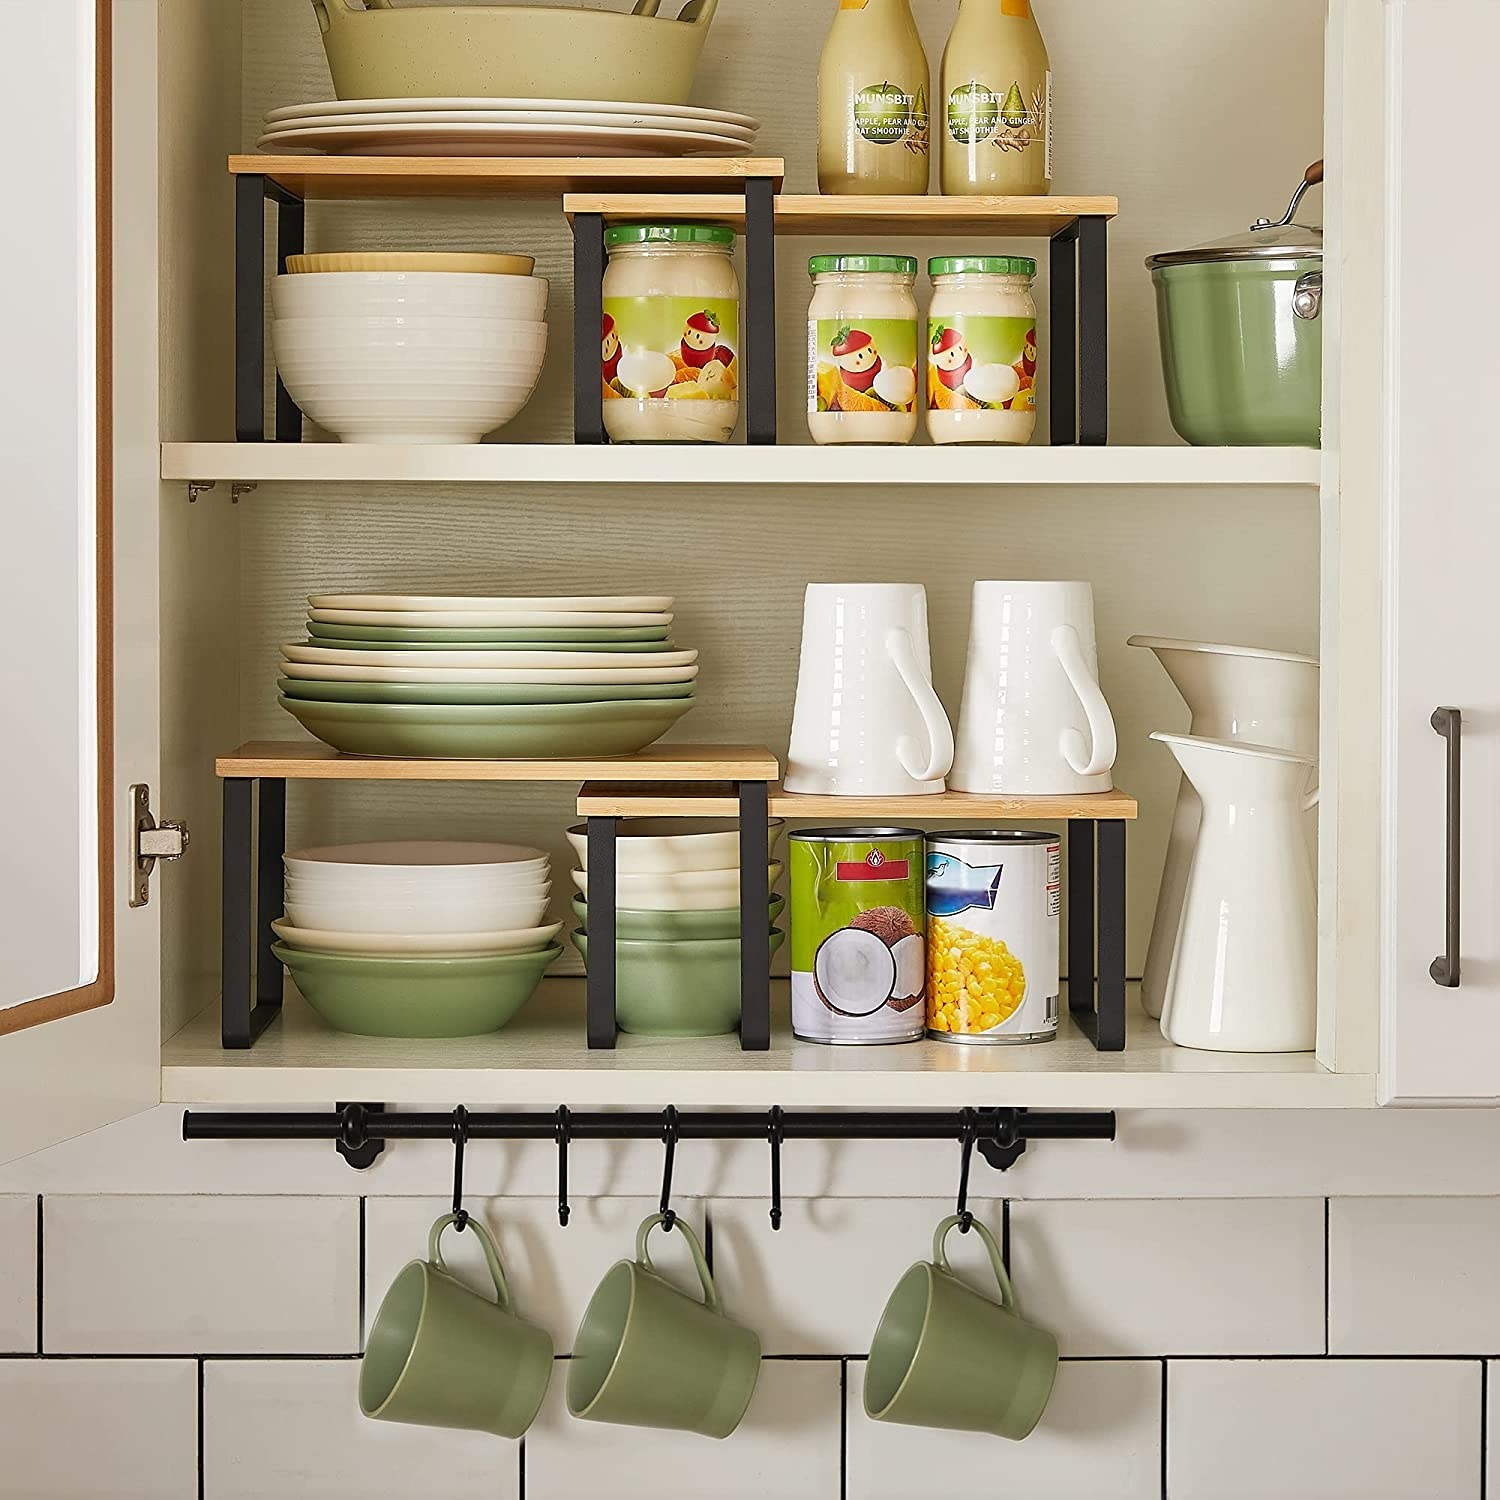 two shelves in a kitchen cupboard